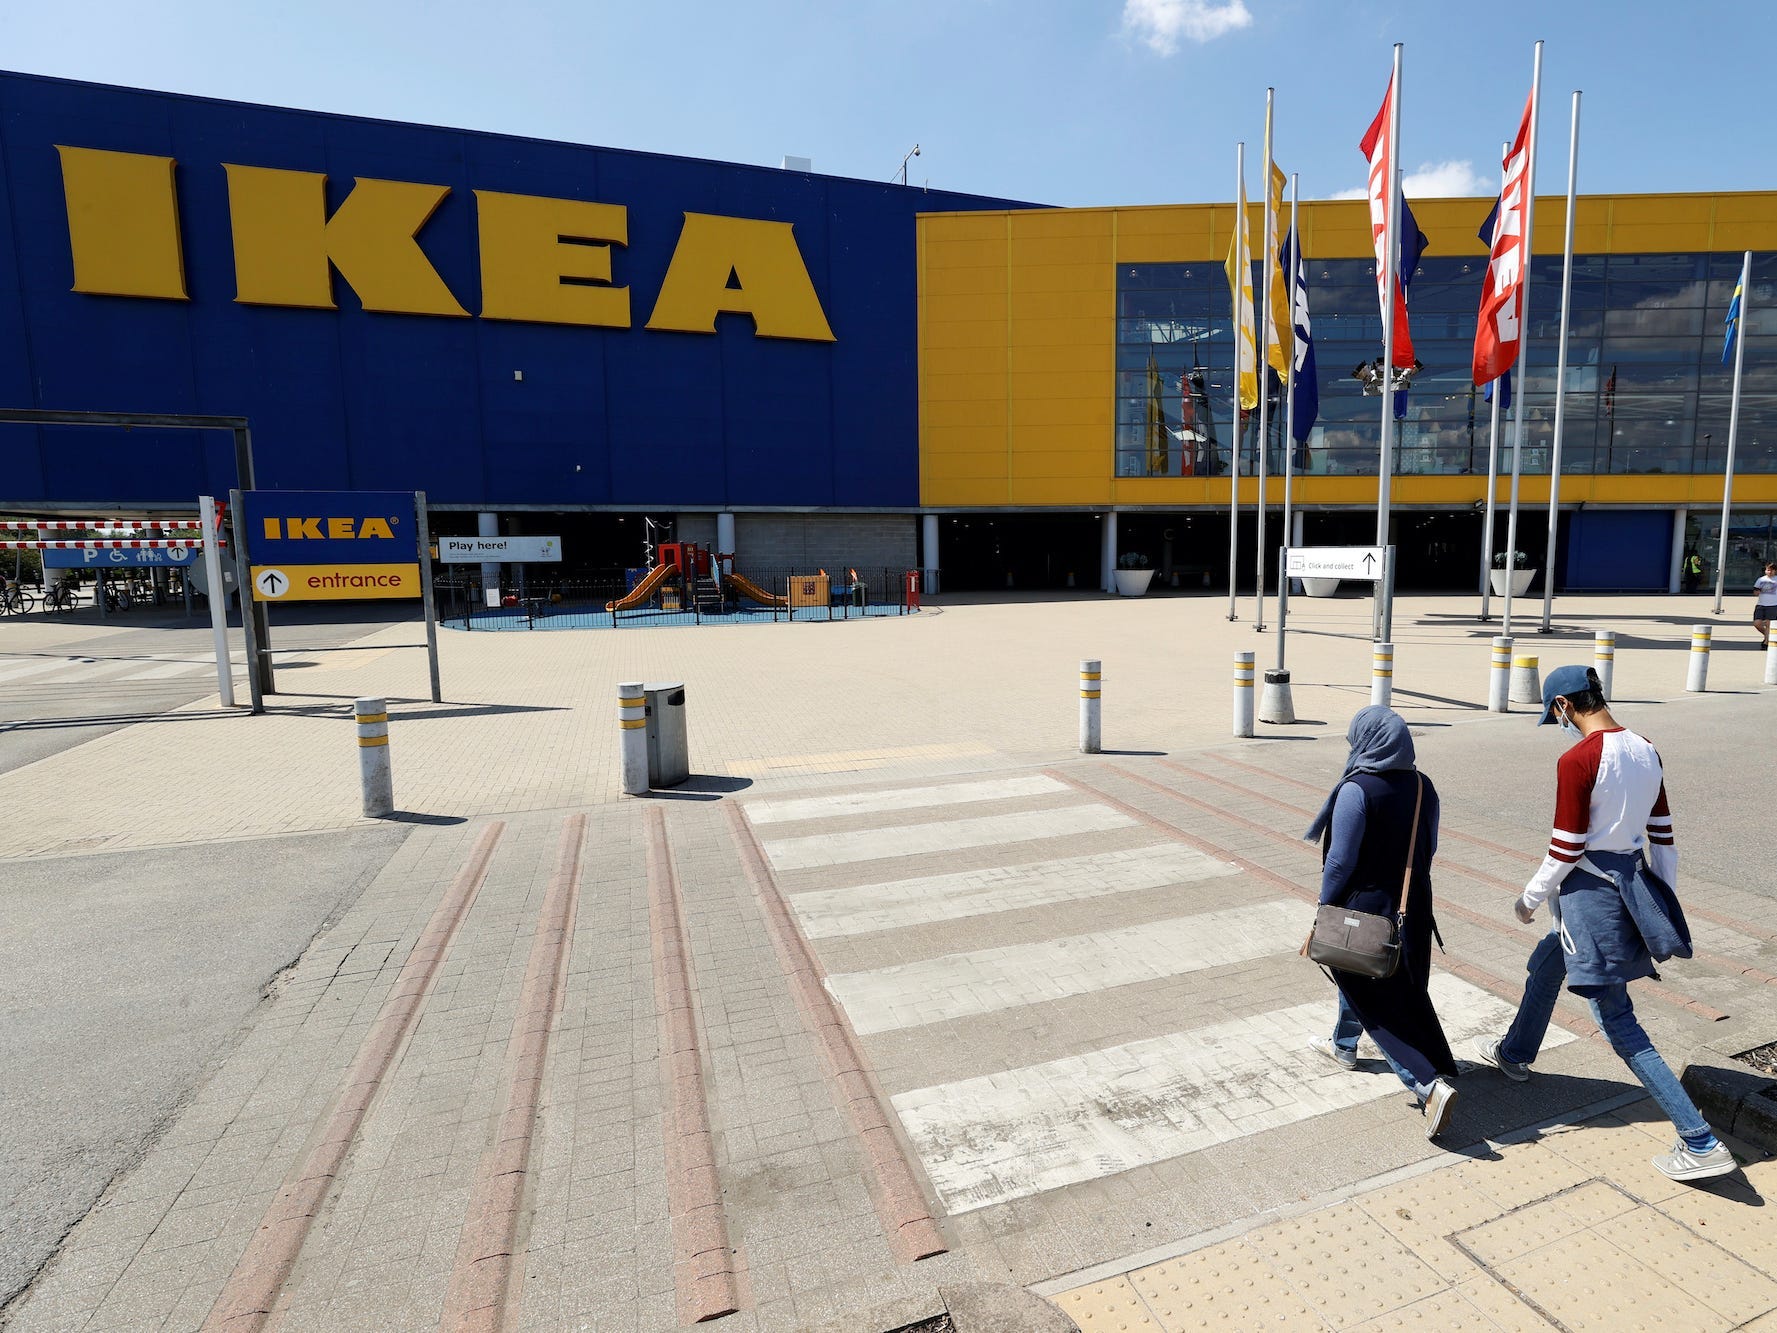 ikea is opening 50 small format stores globally as it experiments with new retail concepts in vibrant urban destinations during the pandemic